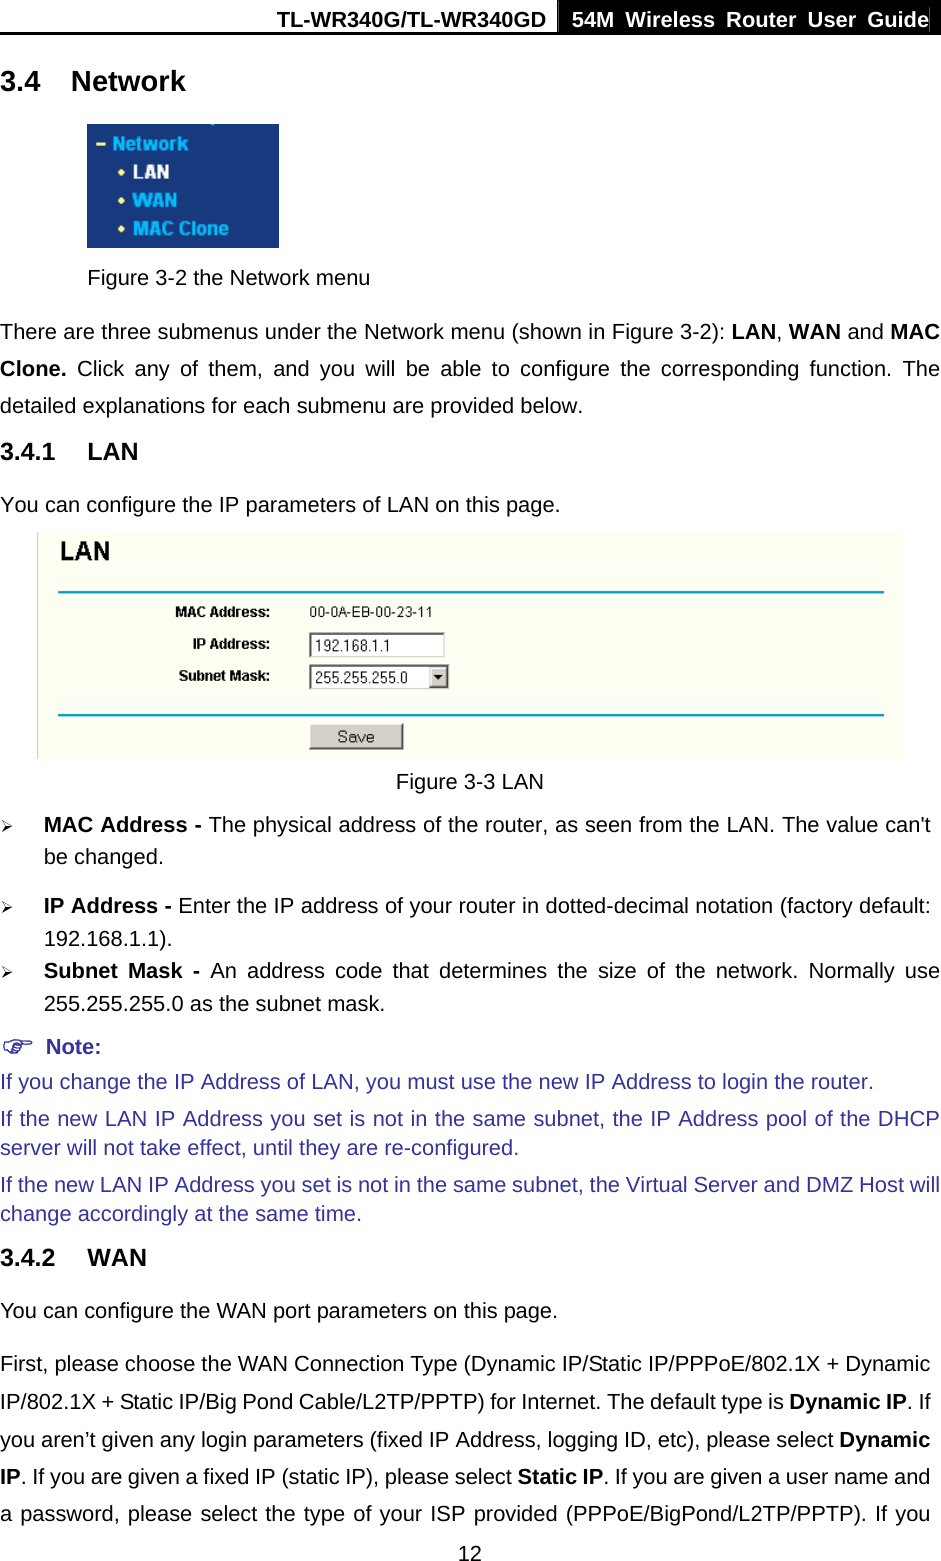 TL-WR340G/TL-WR340GD 54M Wireless Router User Guide  123.4 Network  Figure 3-2 the Network menu There are three submenus under the Network menu (shown in Figure 3-2): LAN, WAN and MAC Clone.  Click any of them, and you will be able to configure the corresponding function. The detailed explanations for each submenu are provided below. 3.4.1 LAN You can configure the IP parameters of LAN on this page.  Figure 3-3 LAN ¾ MAC Address - The physical address of the router, as seen from the LAN. The value can&apos;t be changed. ¾ IP Address - Enter the IP address of your router in dotted-decimal notation (factory default: 192.168.1.1). ¾ Subnet Mask - An address code that determines the size of the network. Normally use 255.255.255.0 as the subnet mask. ) Note: If you change the IP Address of LAN, you must use the new IP Address to login the router. If the new LAN IP Address you set is not in the same subnet, the IP Address pool of the DHCP server will not take effect, until they are re-configured. If the new LAN IP Address you set is not in the same subnet, the Virtual Server and DMZ Host will change accordingly at the same time. 3.4.2 WAN You can configure the WAN port parameters on this page. First, please choose the WAN Connection Type (Dynamic IP/Static IP/PPPoE/802.1X + Dynamic IP/802.1X + Static IP/Big Pond Cable/L2TP/PPTP) for Internet. The default type is Dynamic IP. If you aren’t given any login parameters (fixed IP Address, logging ID, etc), please select Dynamic IP. If you are given a fixed IP (static IP), please select Static IP. If you are given a user name and a password, please select the type of your ISP provided (PPPoE/BigPond/L2TP/PPTP). If you 